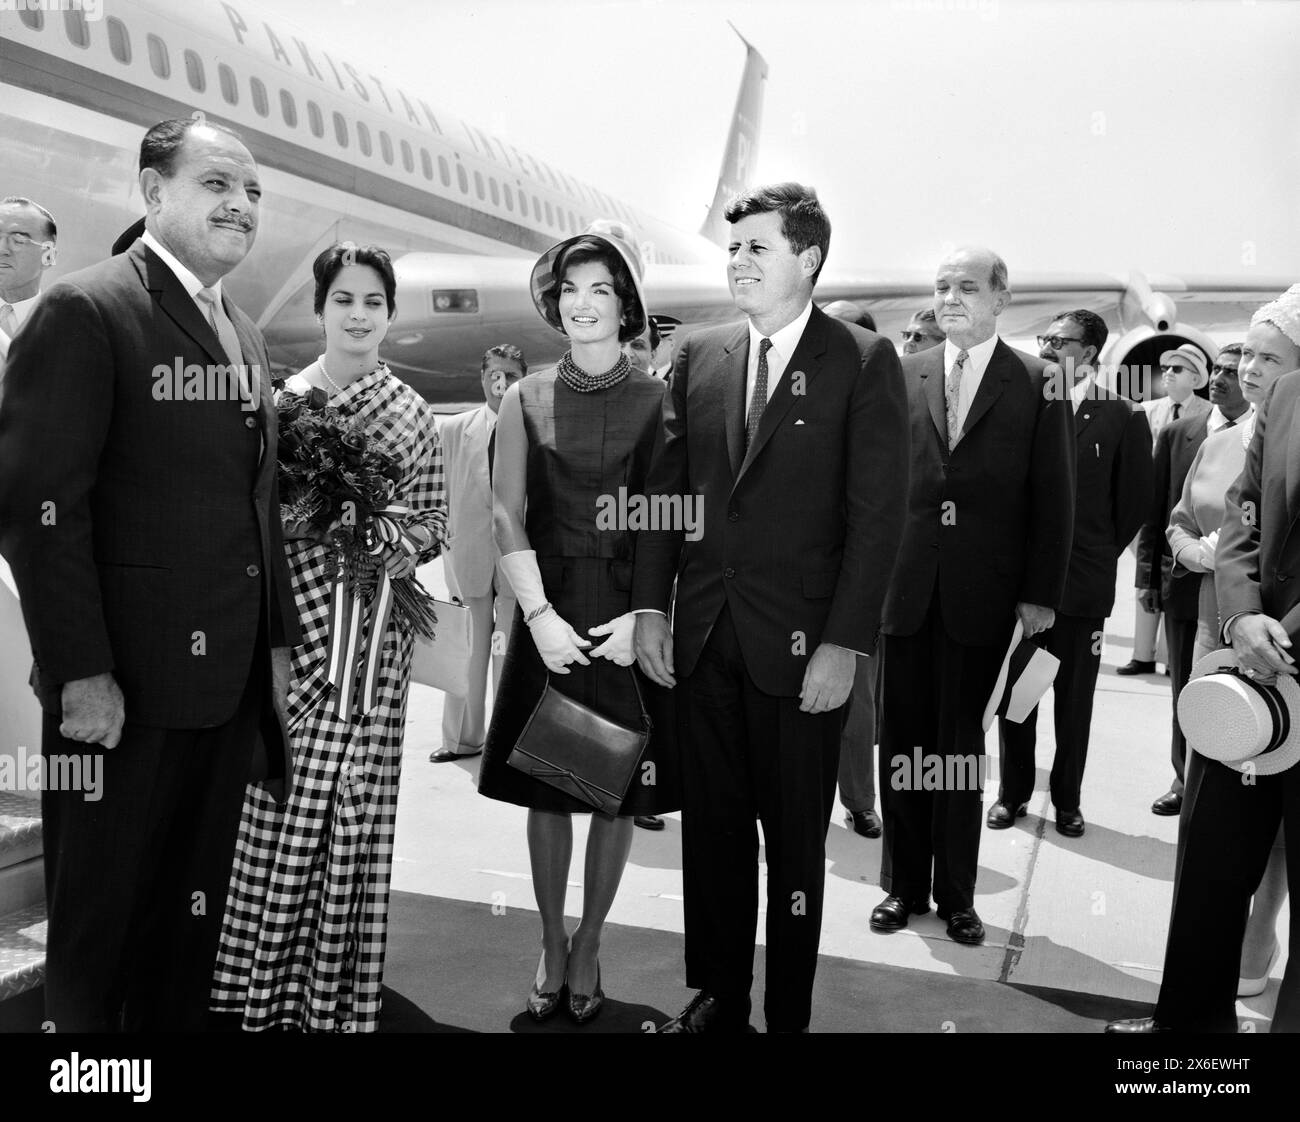 Pakistan President Muhammad Ayub Khan and daughter Begum Ayub Khan with U.S. First Lady Jacqueline Kennedy, U.S. President John F. Kennedy and others upon arrival, Andrews Airforce Base, Maryland, USA, Robert H. McNeill, Robert H. McNeill Family Collection, July 11, 1961 Stock Photo